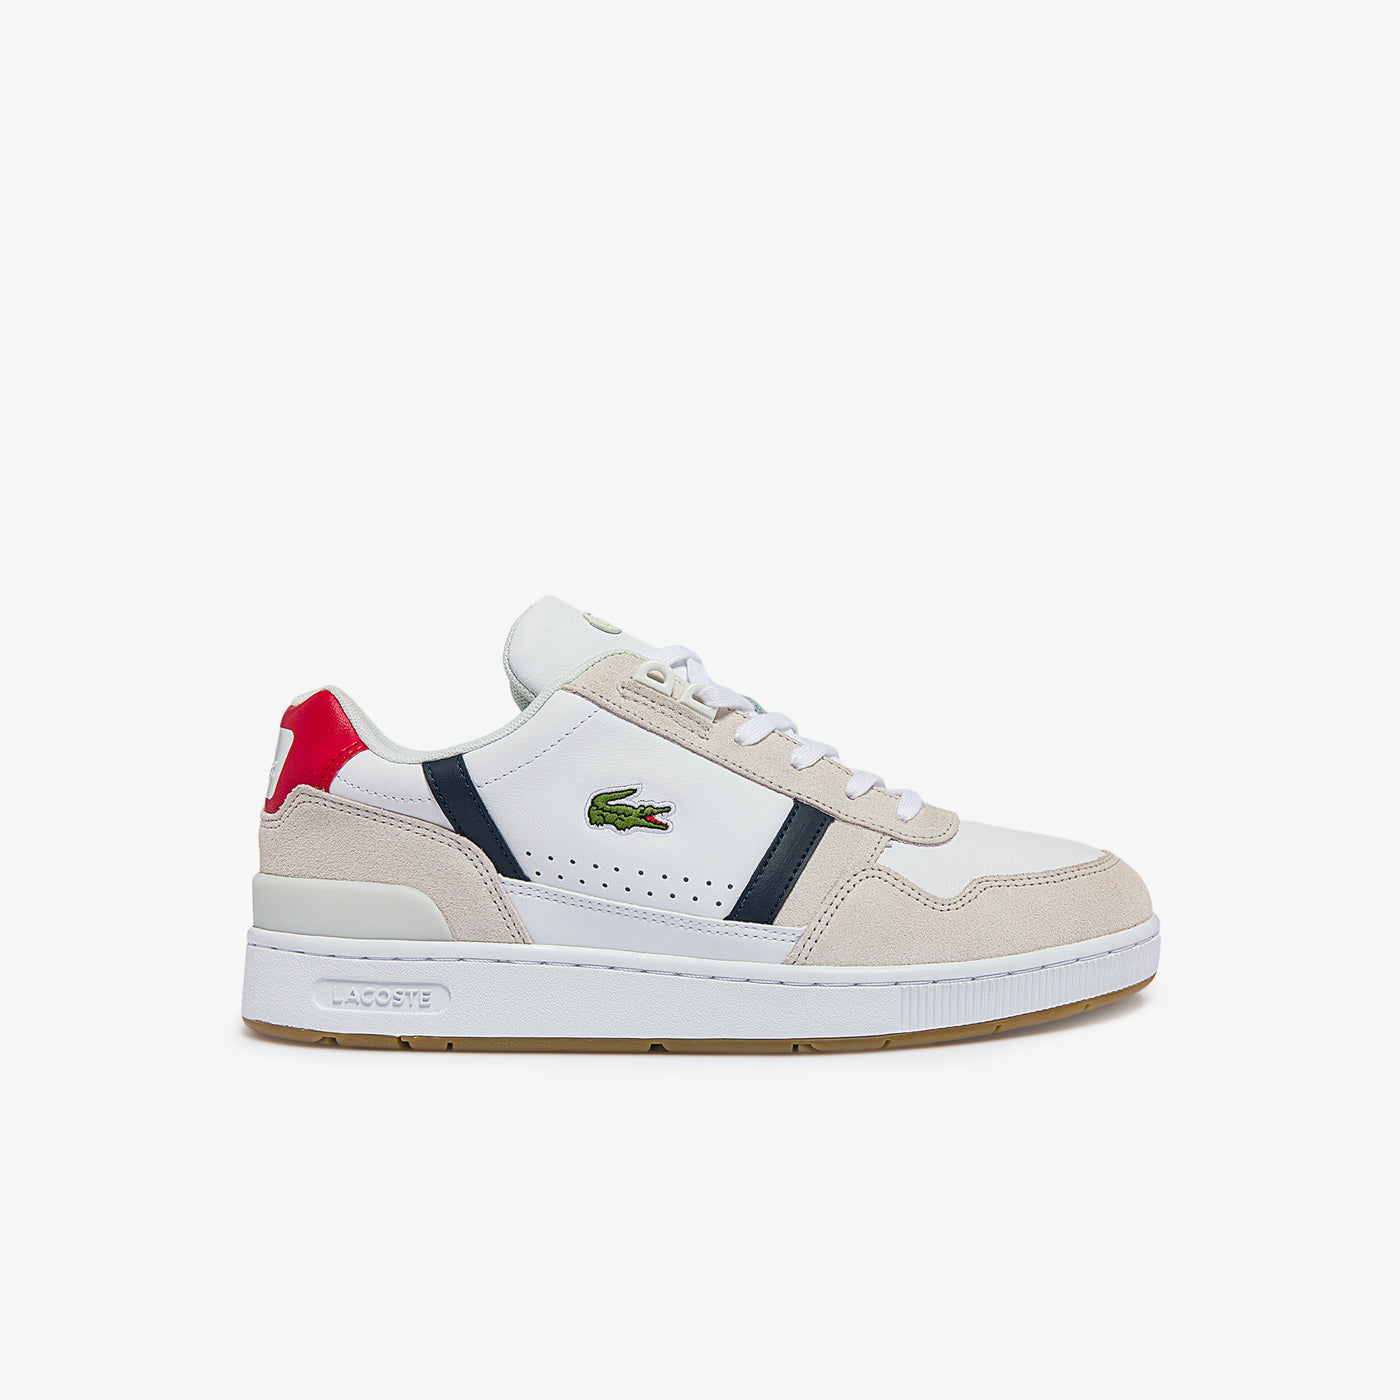 Shop The Latest Collection Of Lacoste Men'S T-Clip Tricolour Leather And Suede Trainers - 40Sma0048407 In Lebanon